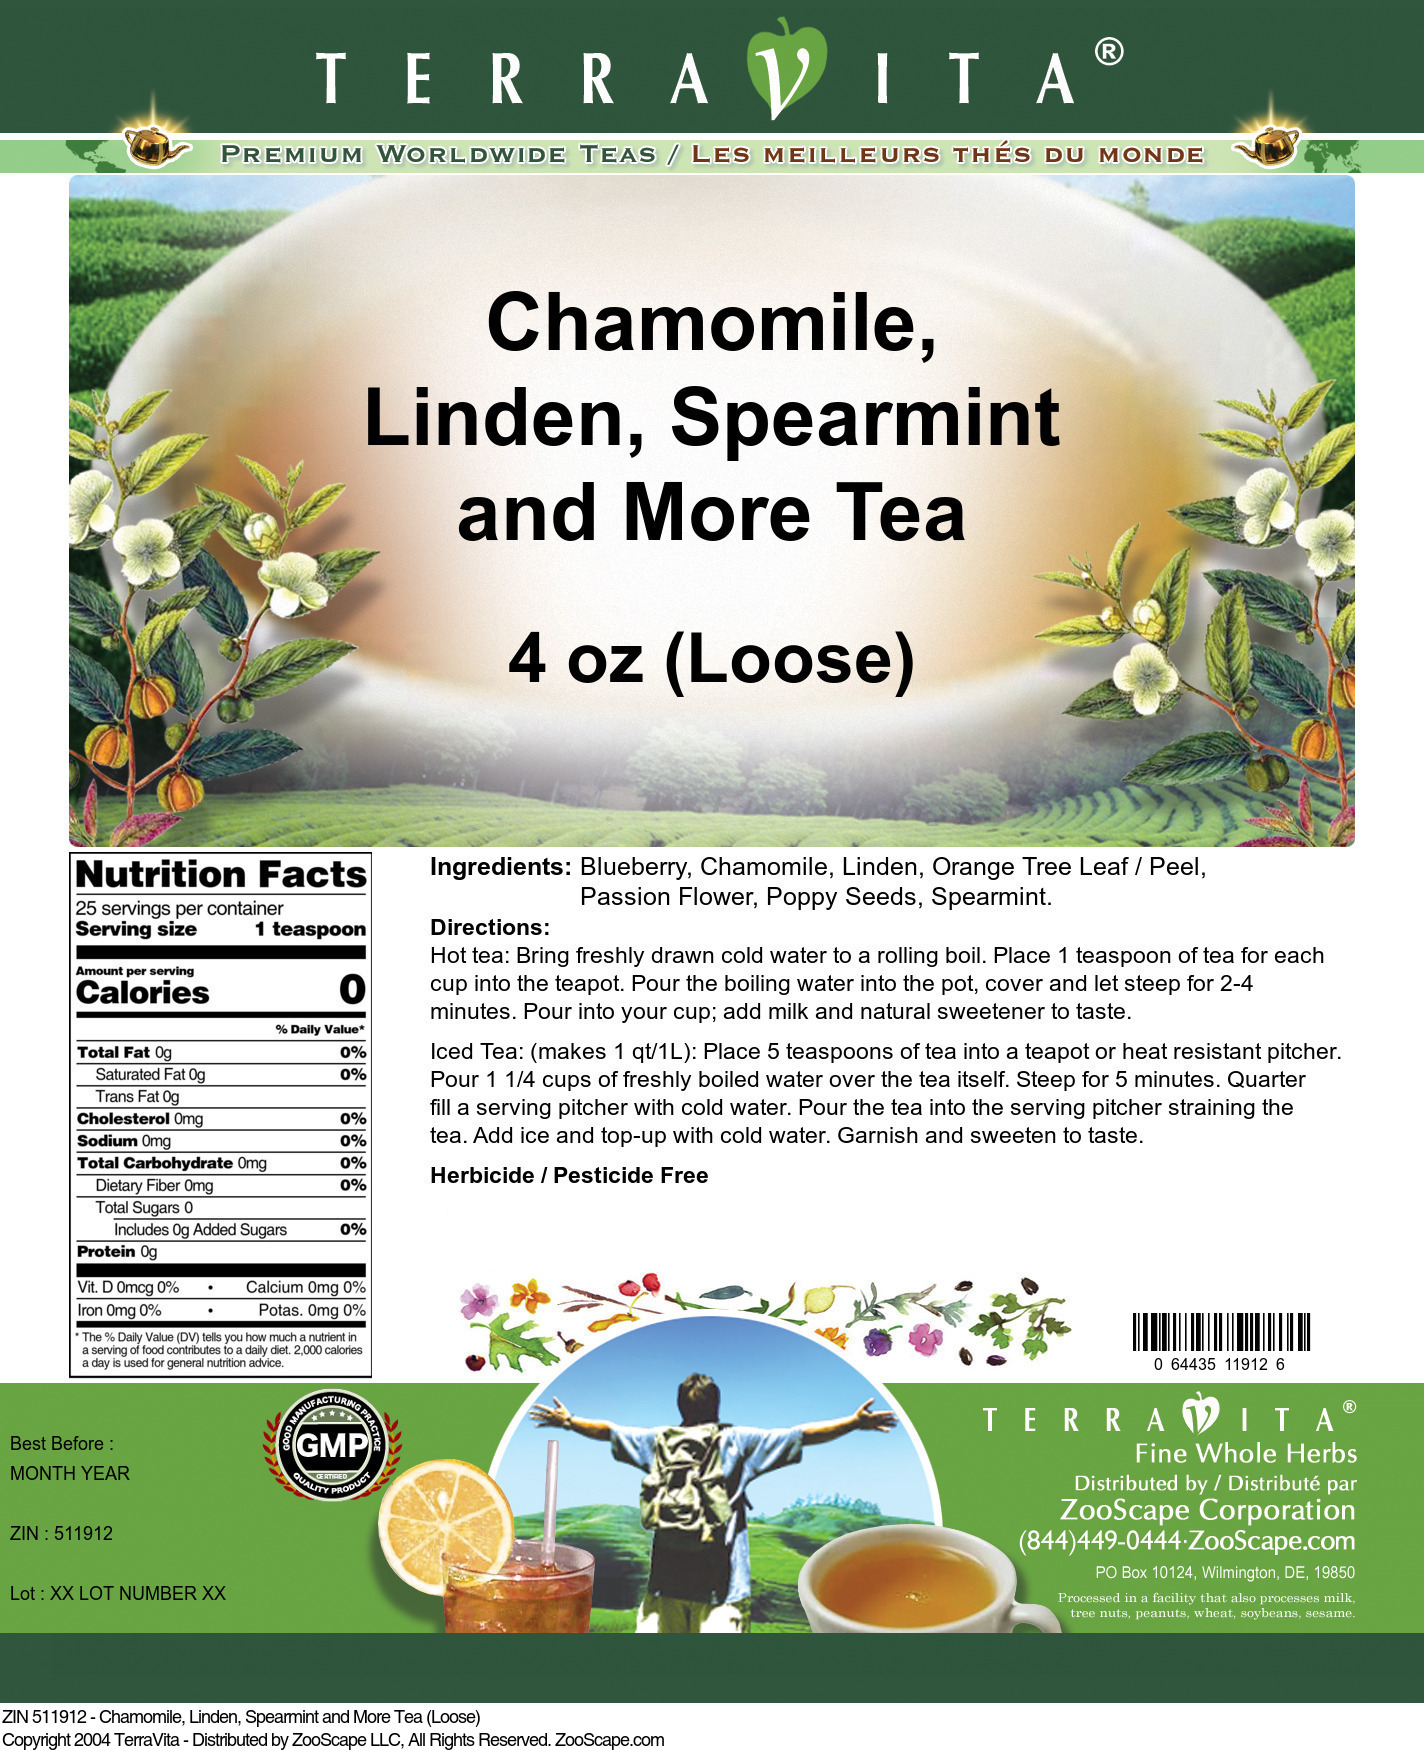 Chamomile, Linden, Spearmint and More Tea (Loose) - Label